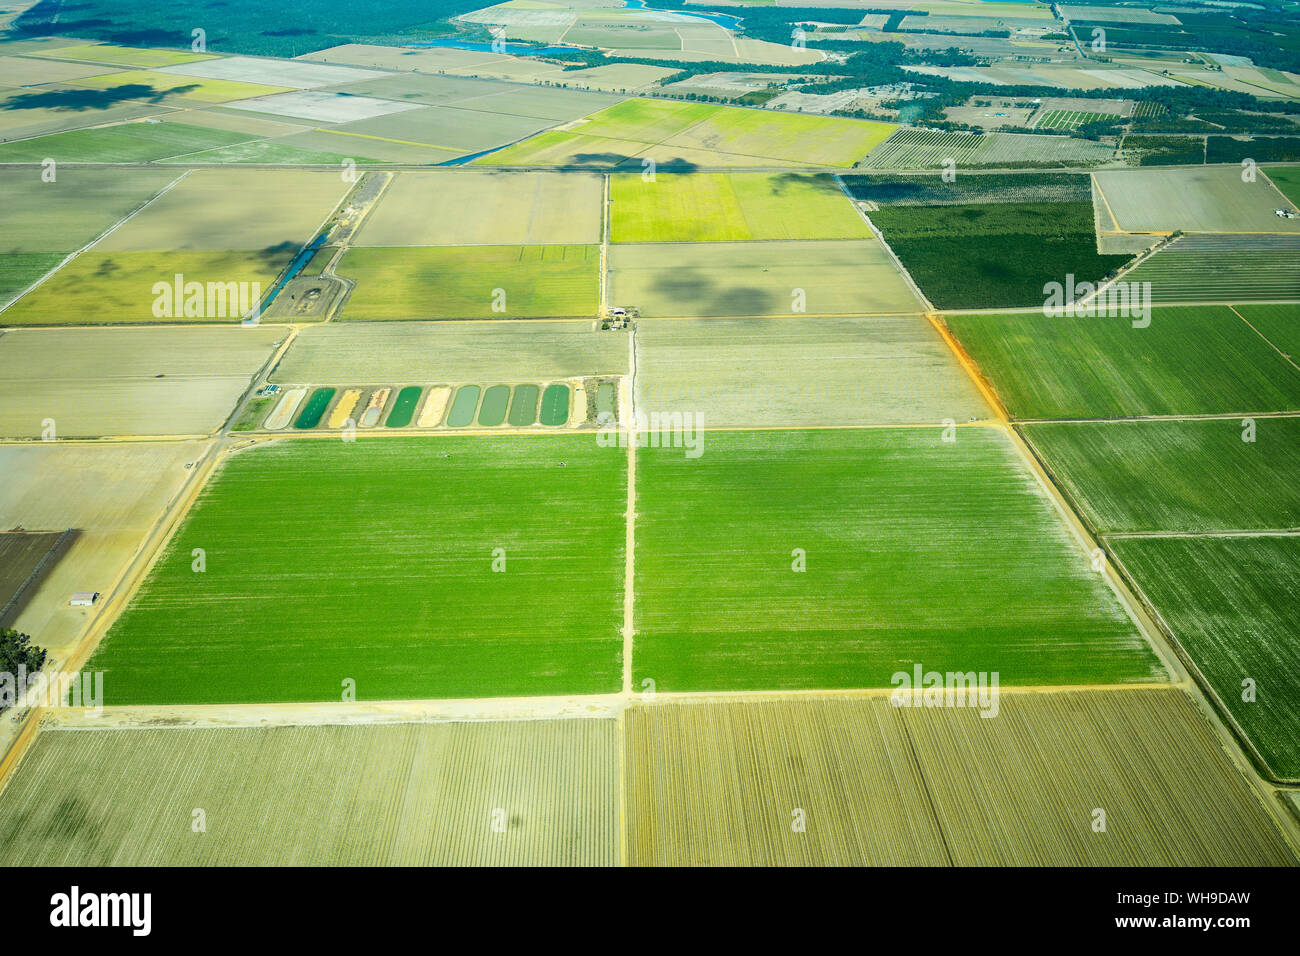 Aerial view of cultivated green fields in Queensland, Australia Stock Photo